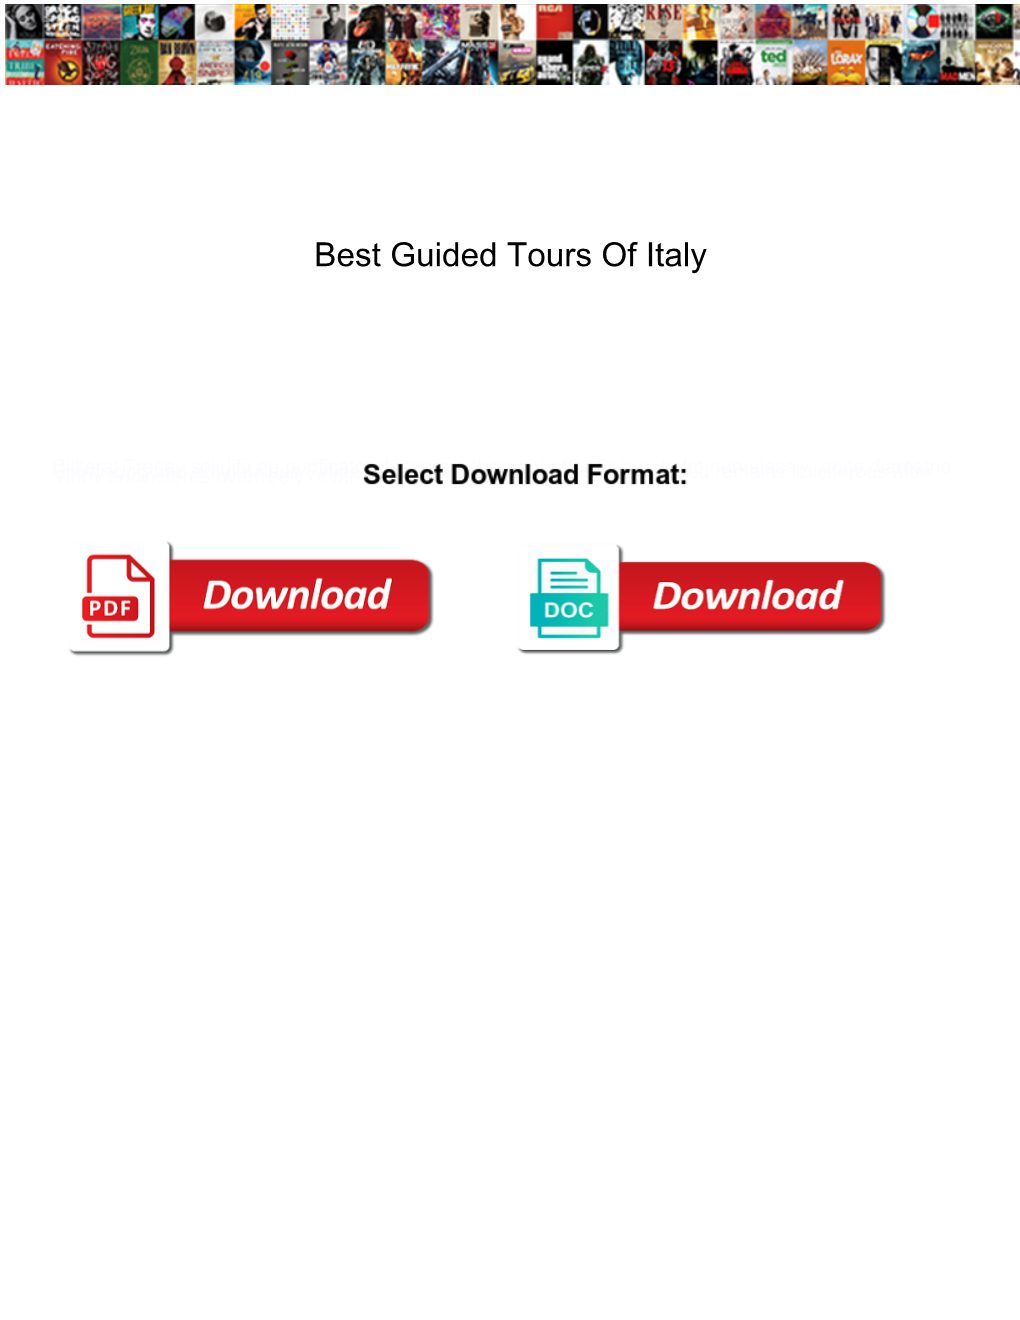 Best Guided Tours of Italy